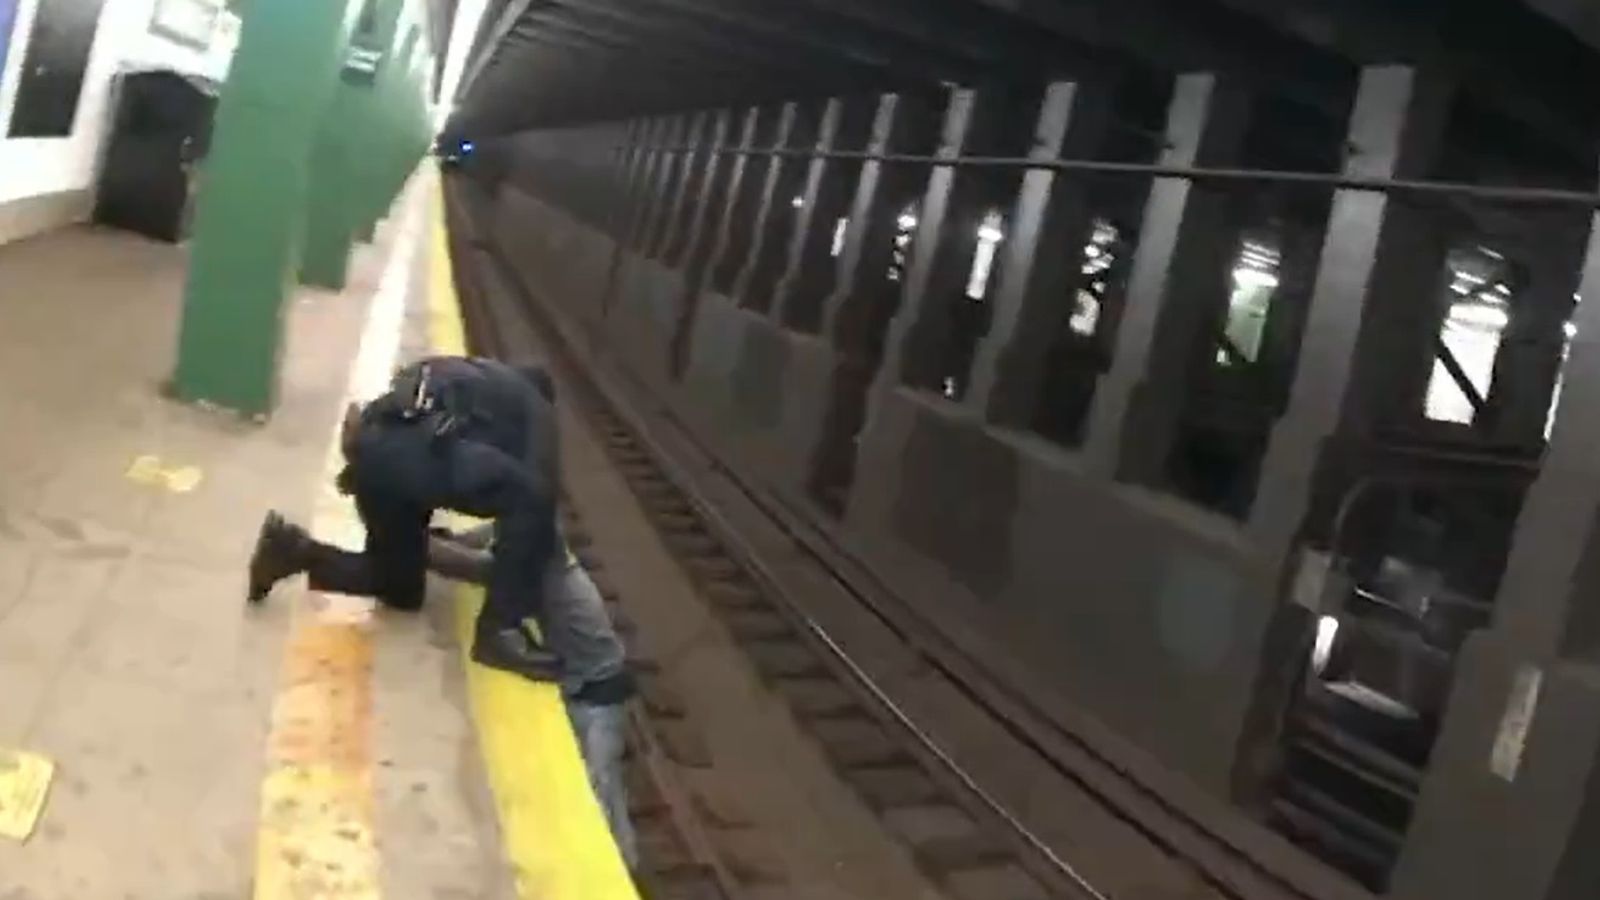 NYPD officer jumps on to subway tracks to rescue man